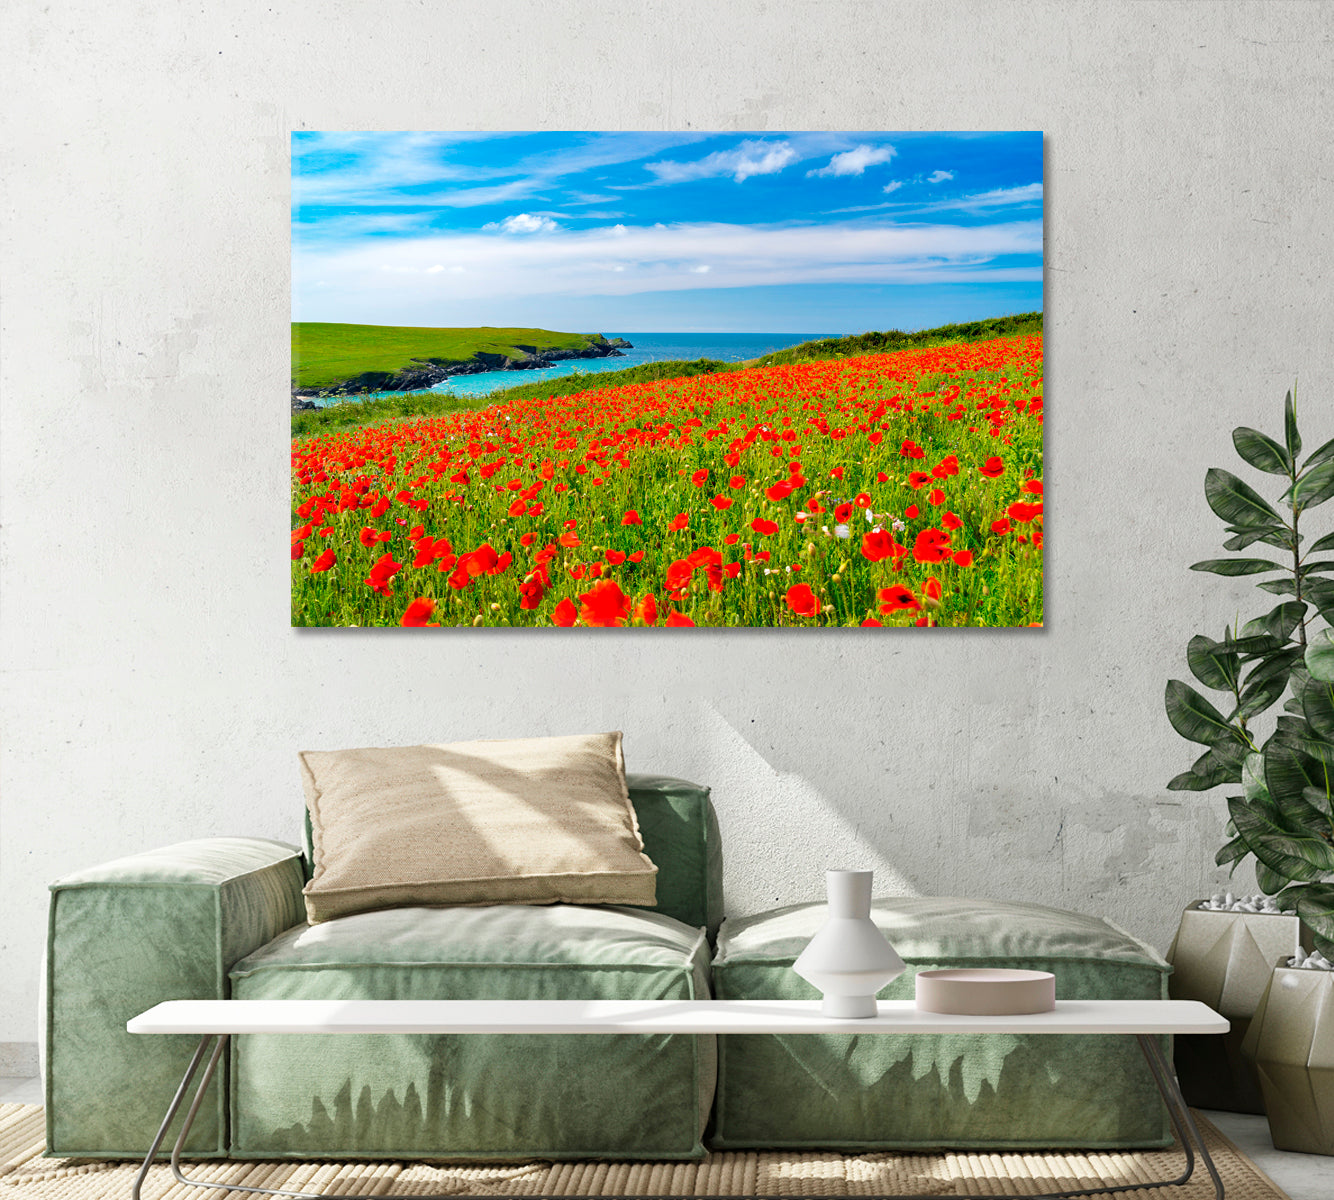 Wildflowers Field with Poppies Canvas Print-Canvas Print-CetArt-1 Panel-24x16 inches-CetArt